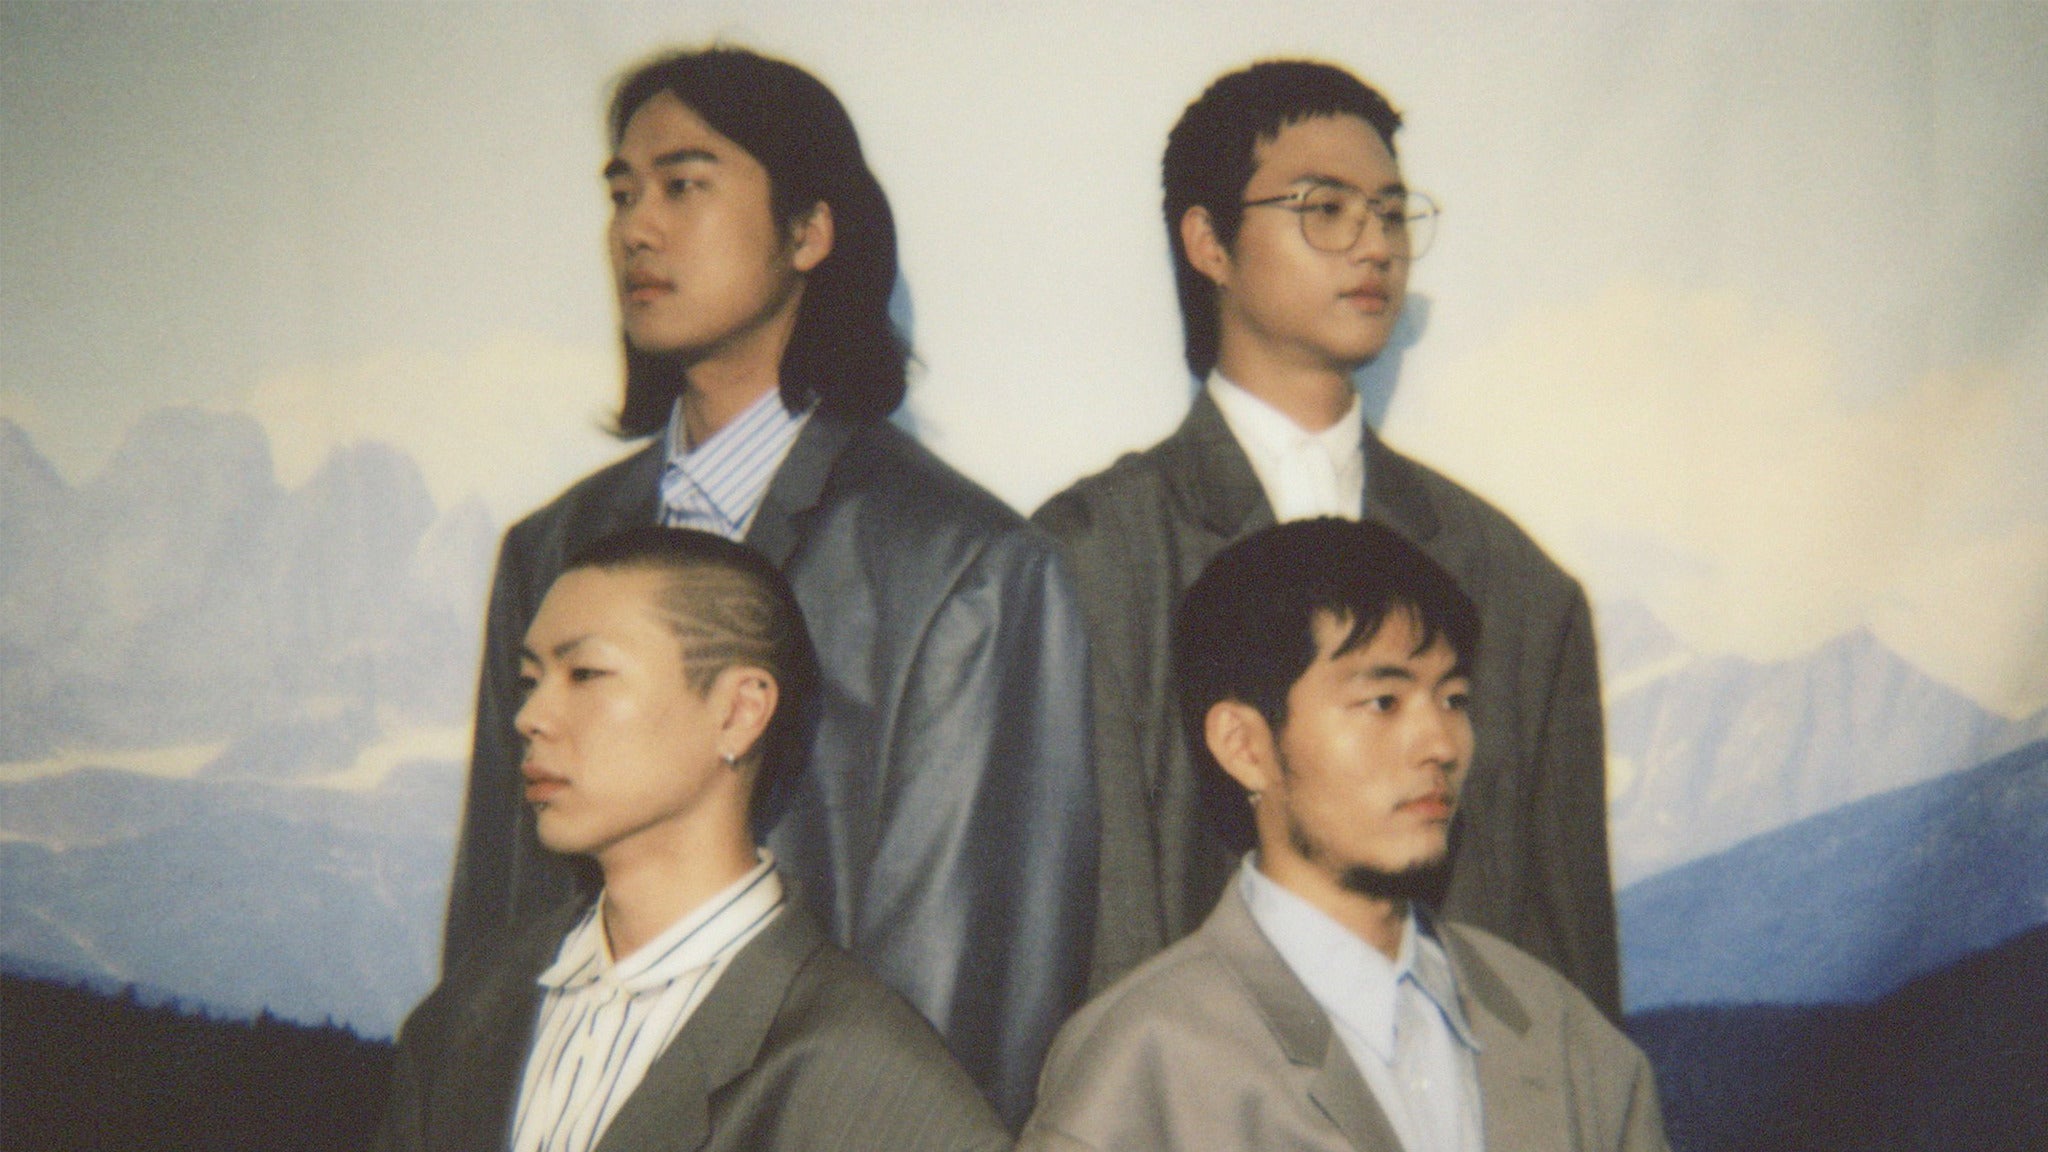 Hyukoh in Toronto promo photo for Official Platinum presale offer code